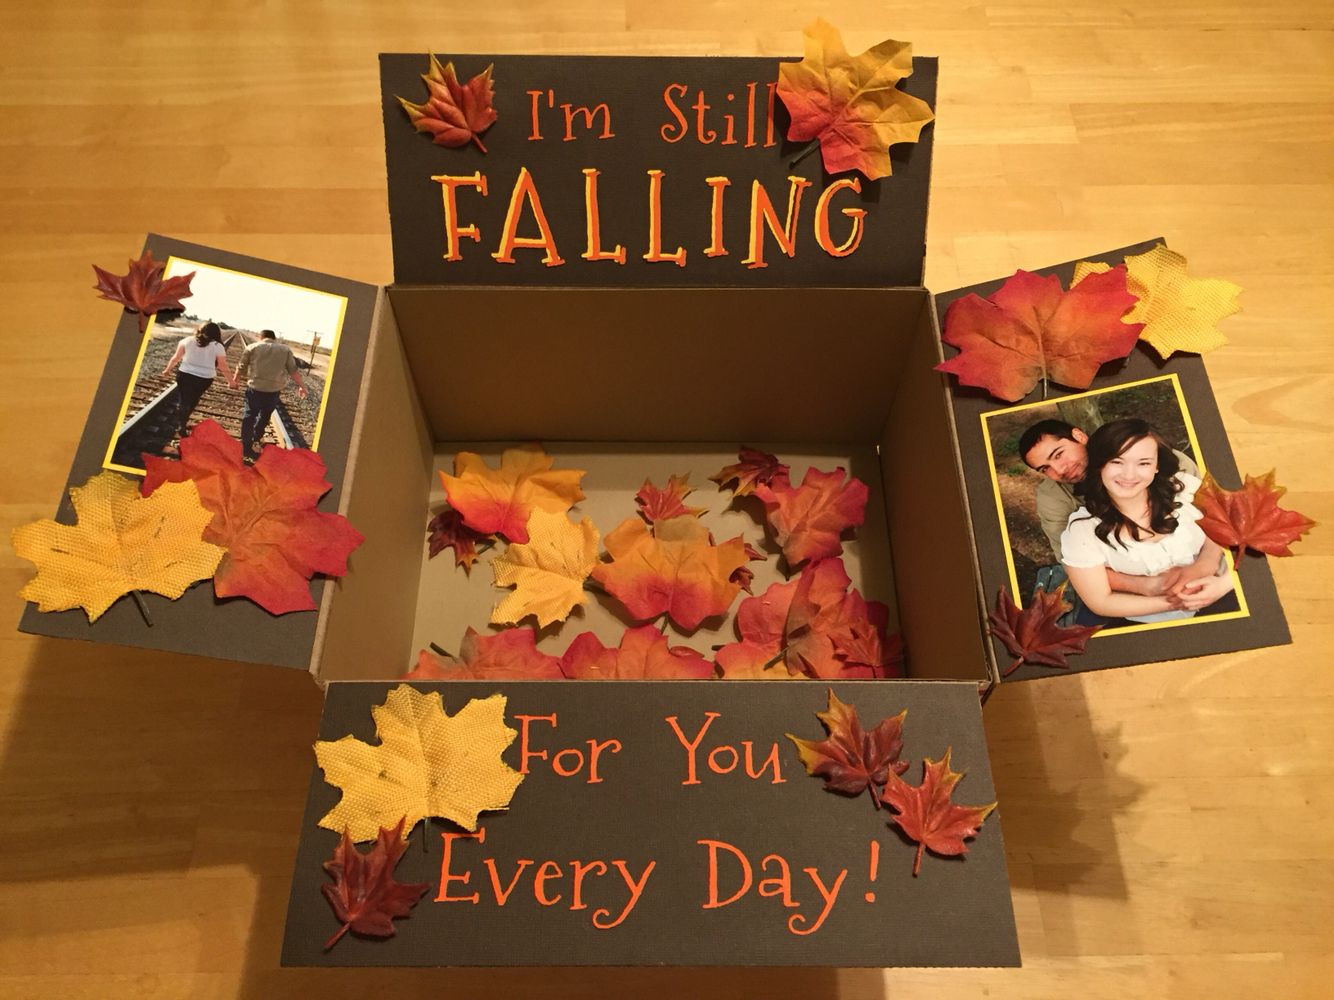 Thanksgiving Gifts For Boyfriend
 "I m Still Falling For You Every Day" Care Package